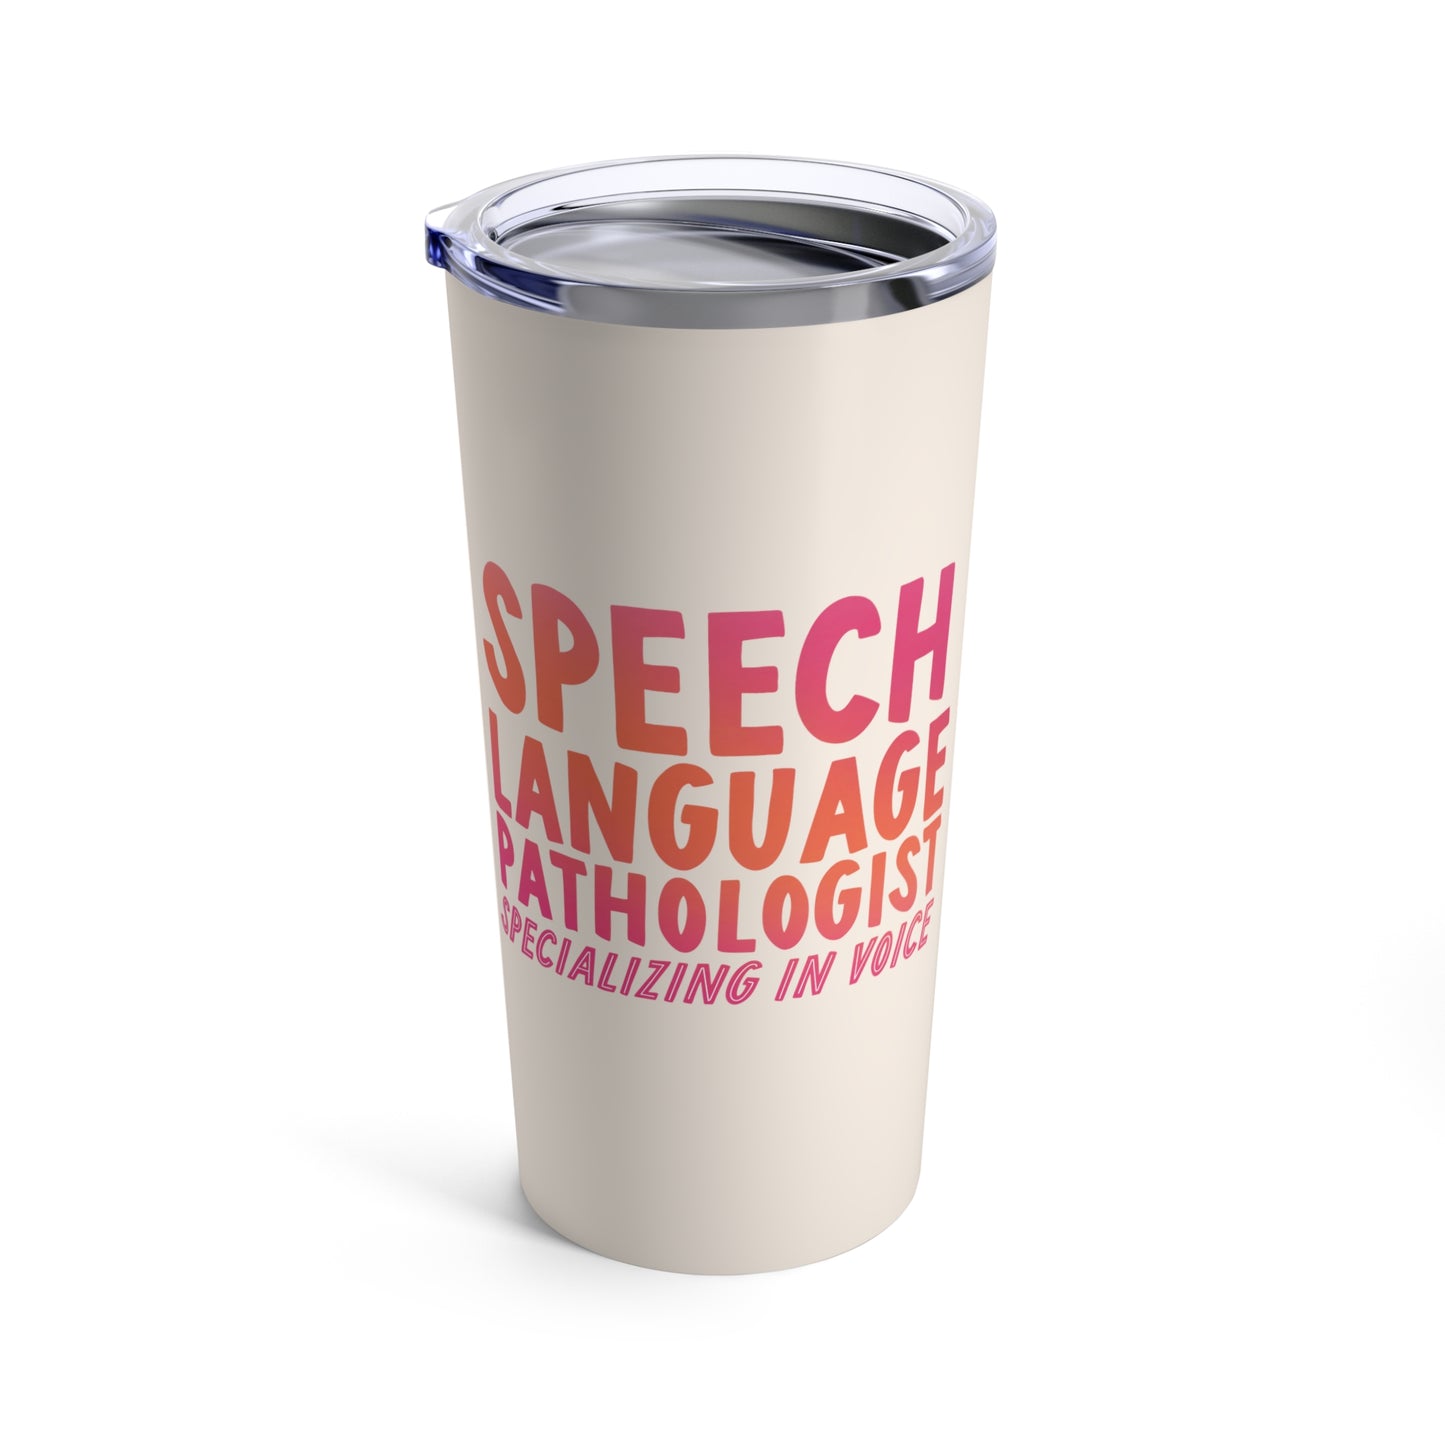 Speech Language Pathologist Specializing in Voice Thermos